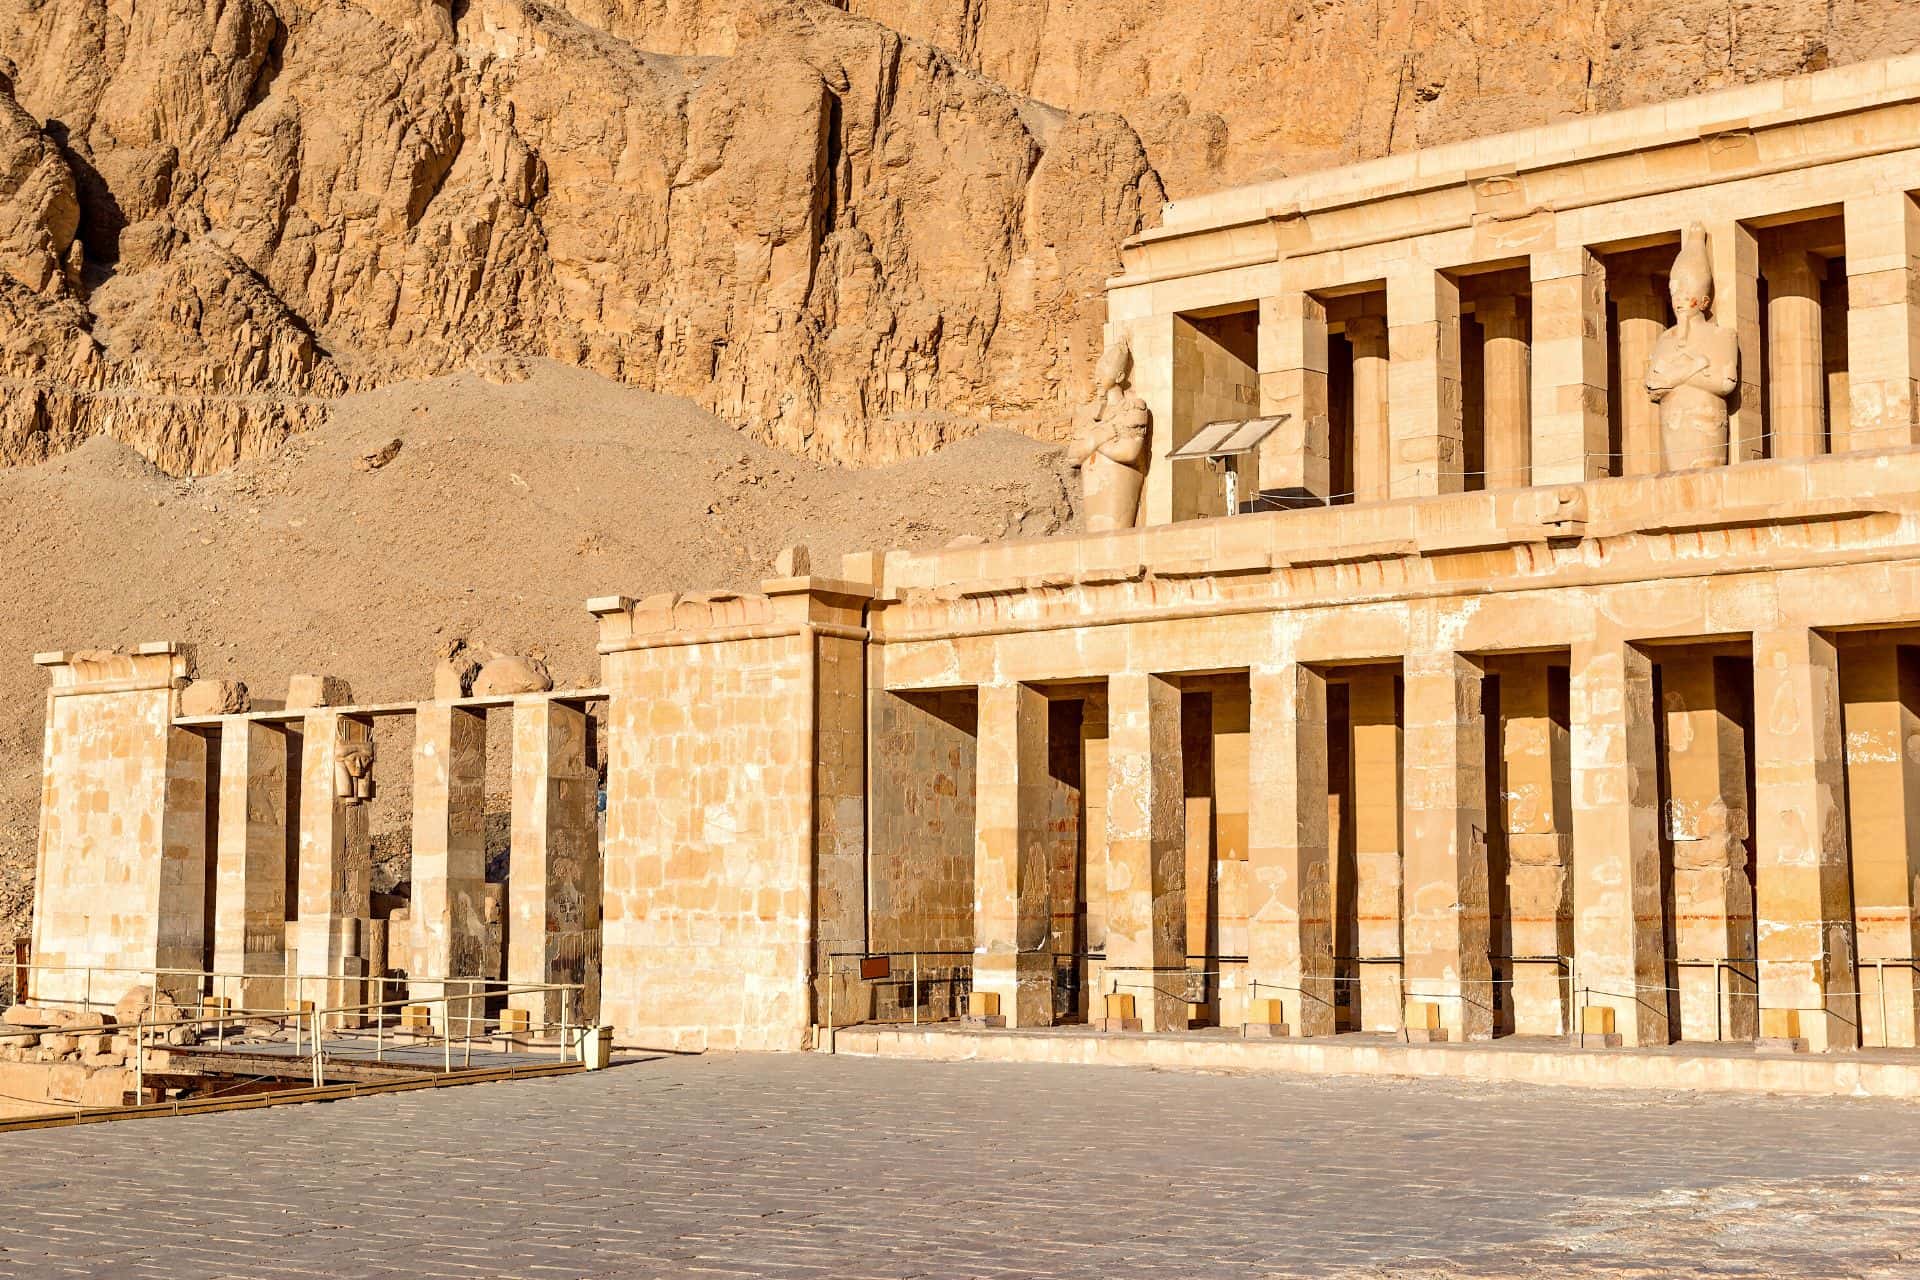 The Southern Colonnade at the Temple of Hatshepsut